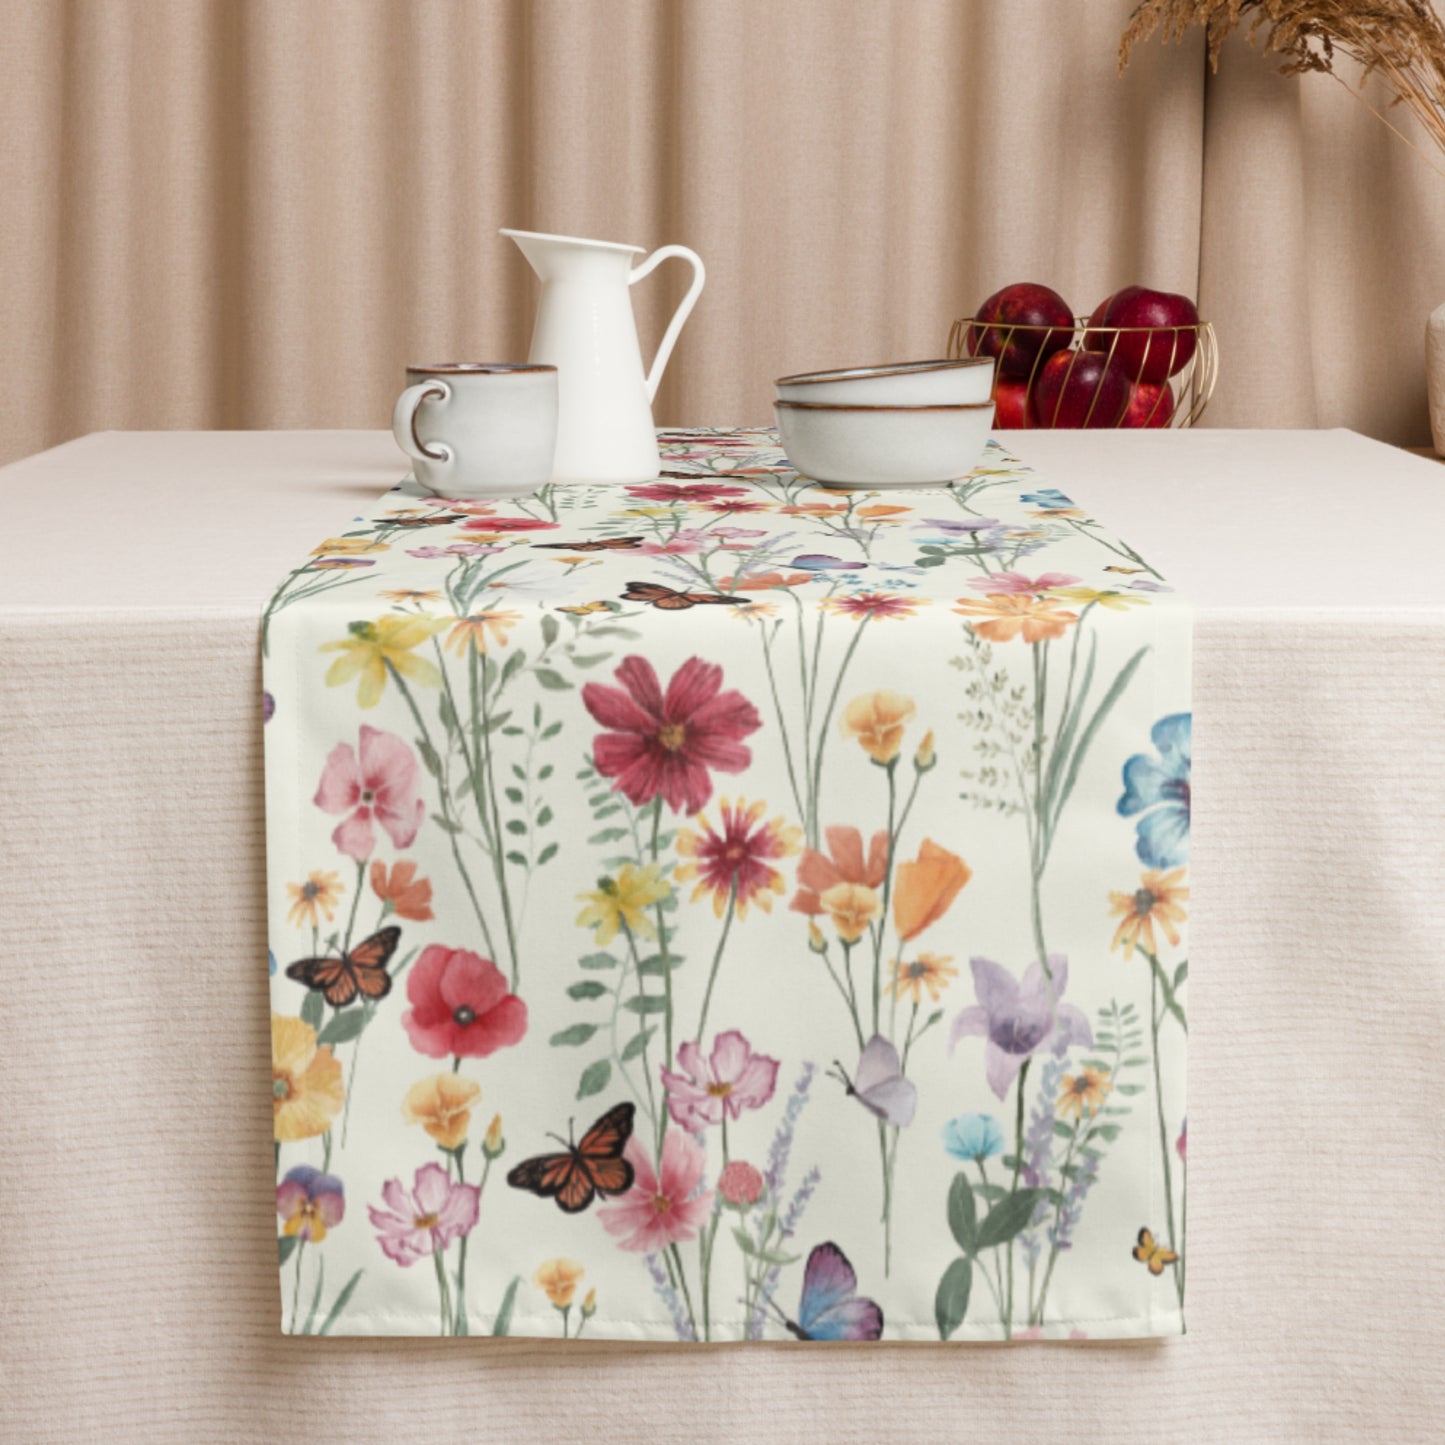 a botanical flowers table runner topped with cups and saucers on top of a table